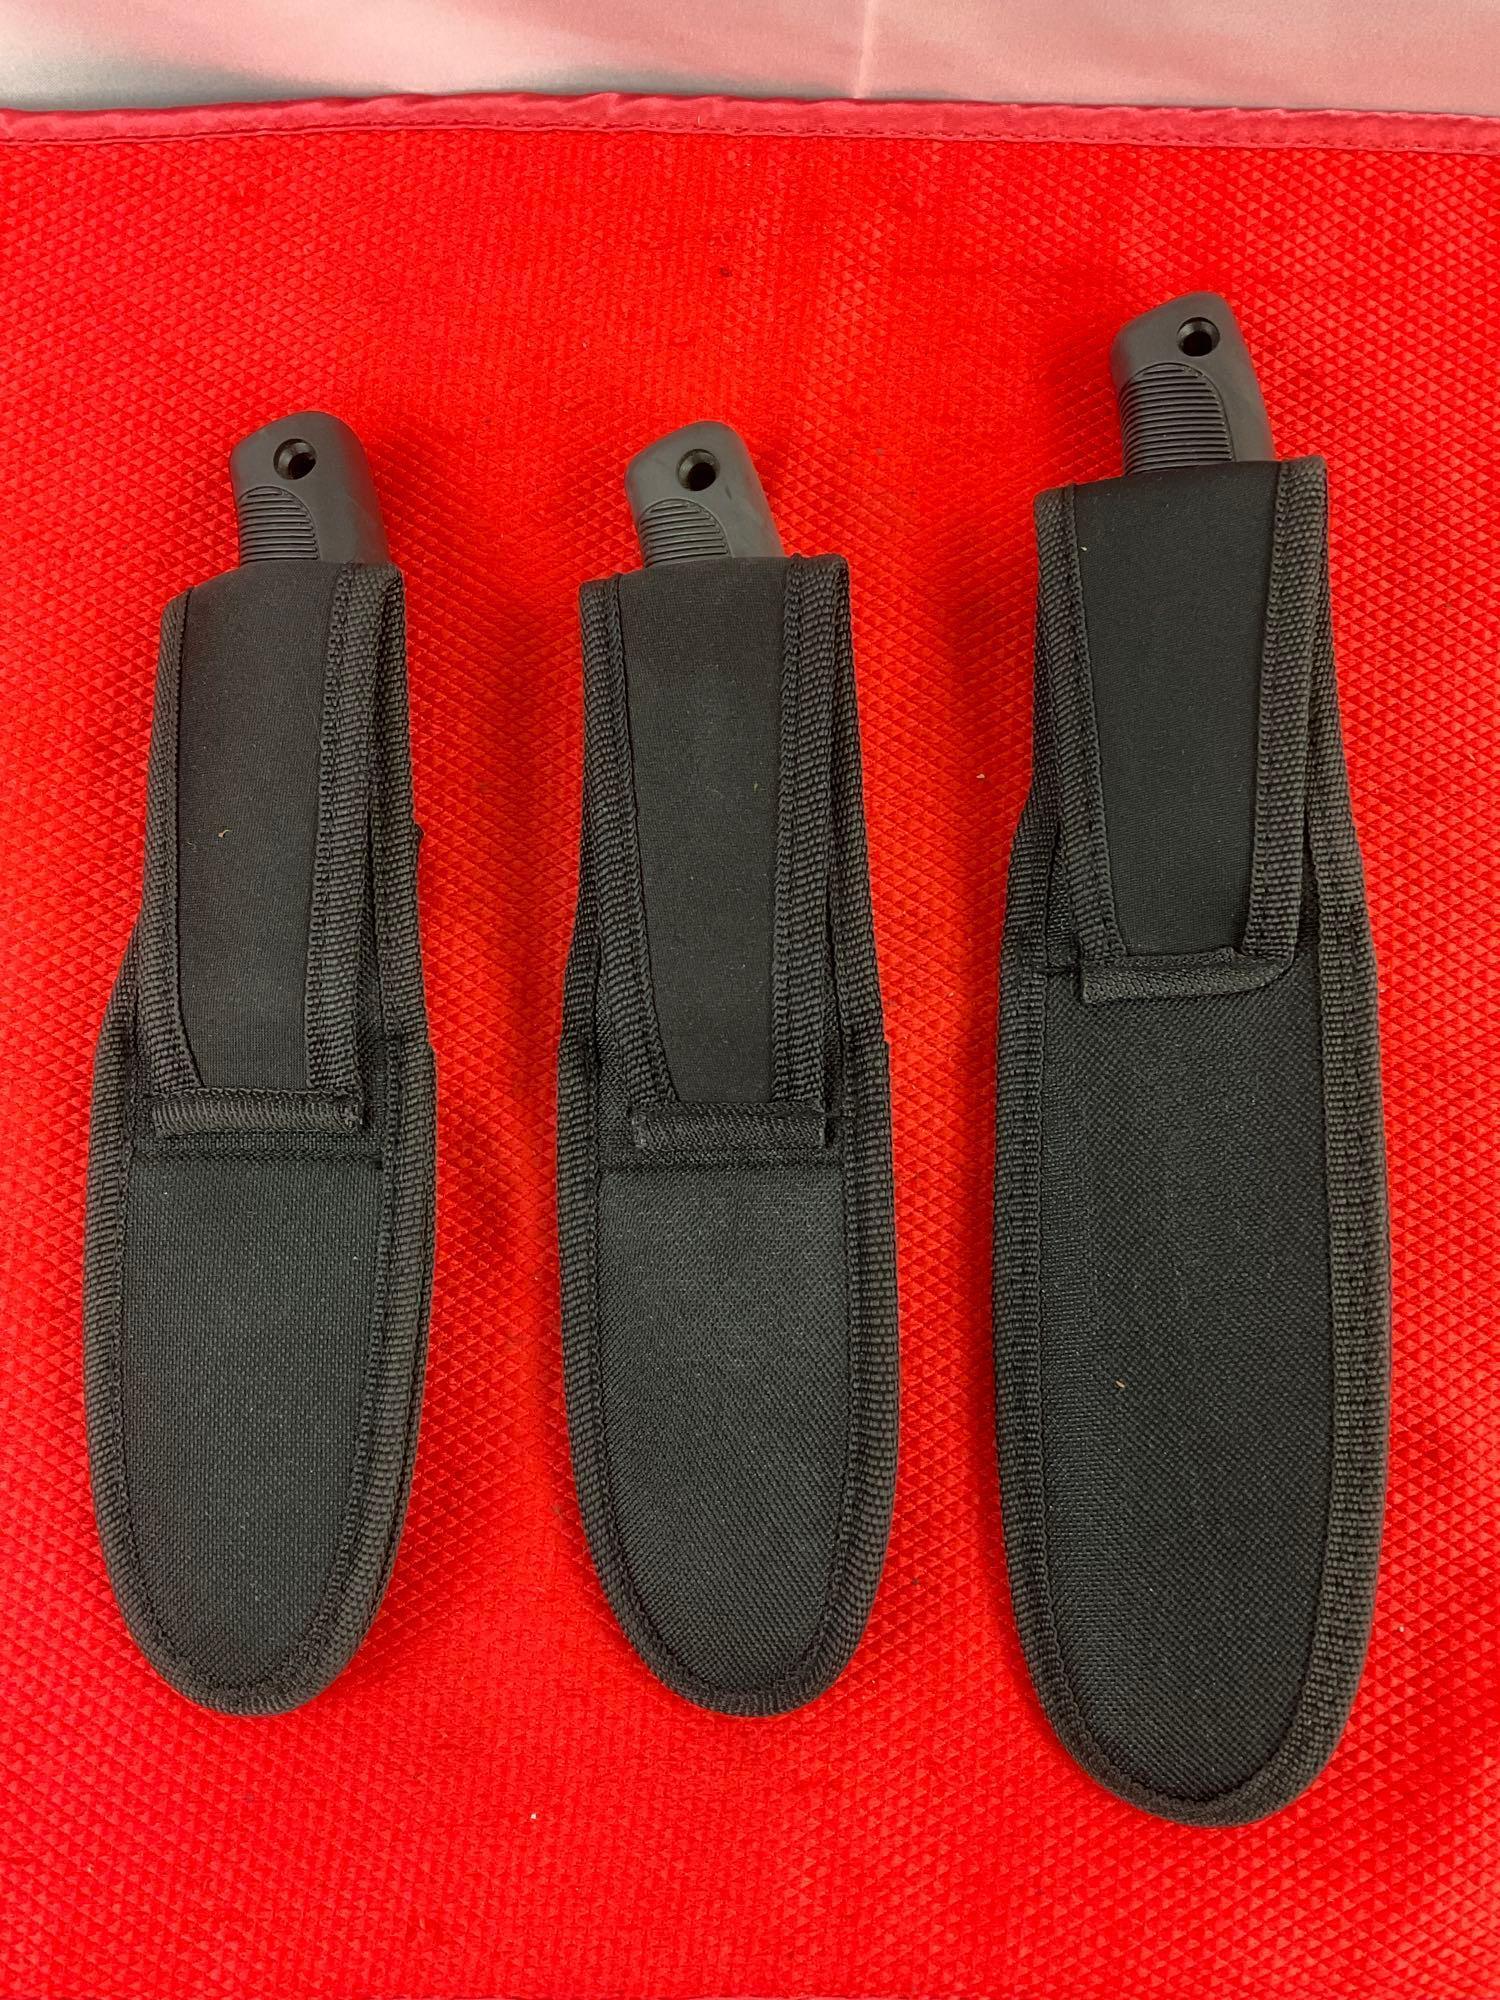 3 pcs WatchFire Steel Fixed Blade Hunting Knives w/ Sheathes. 2x 210922. 1x 210920. See pics.